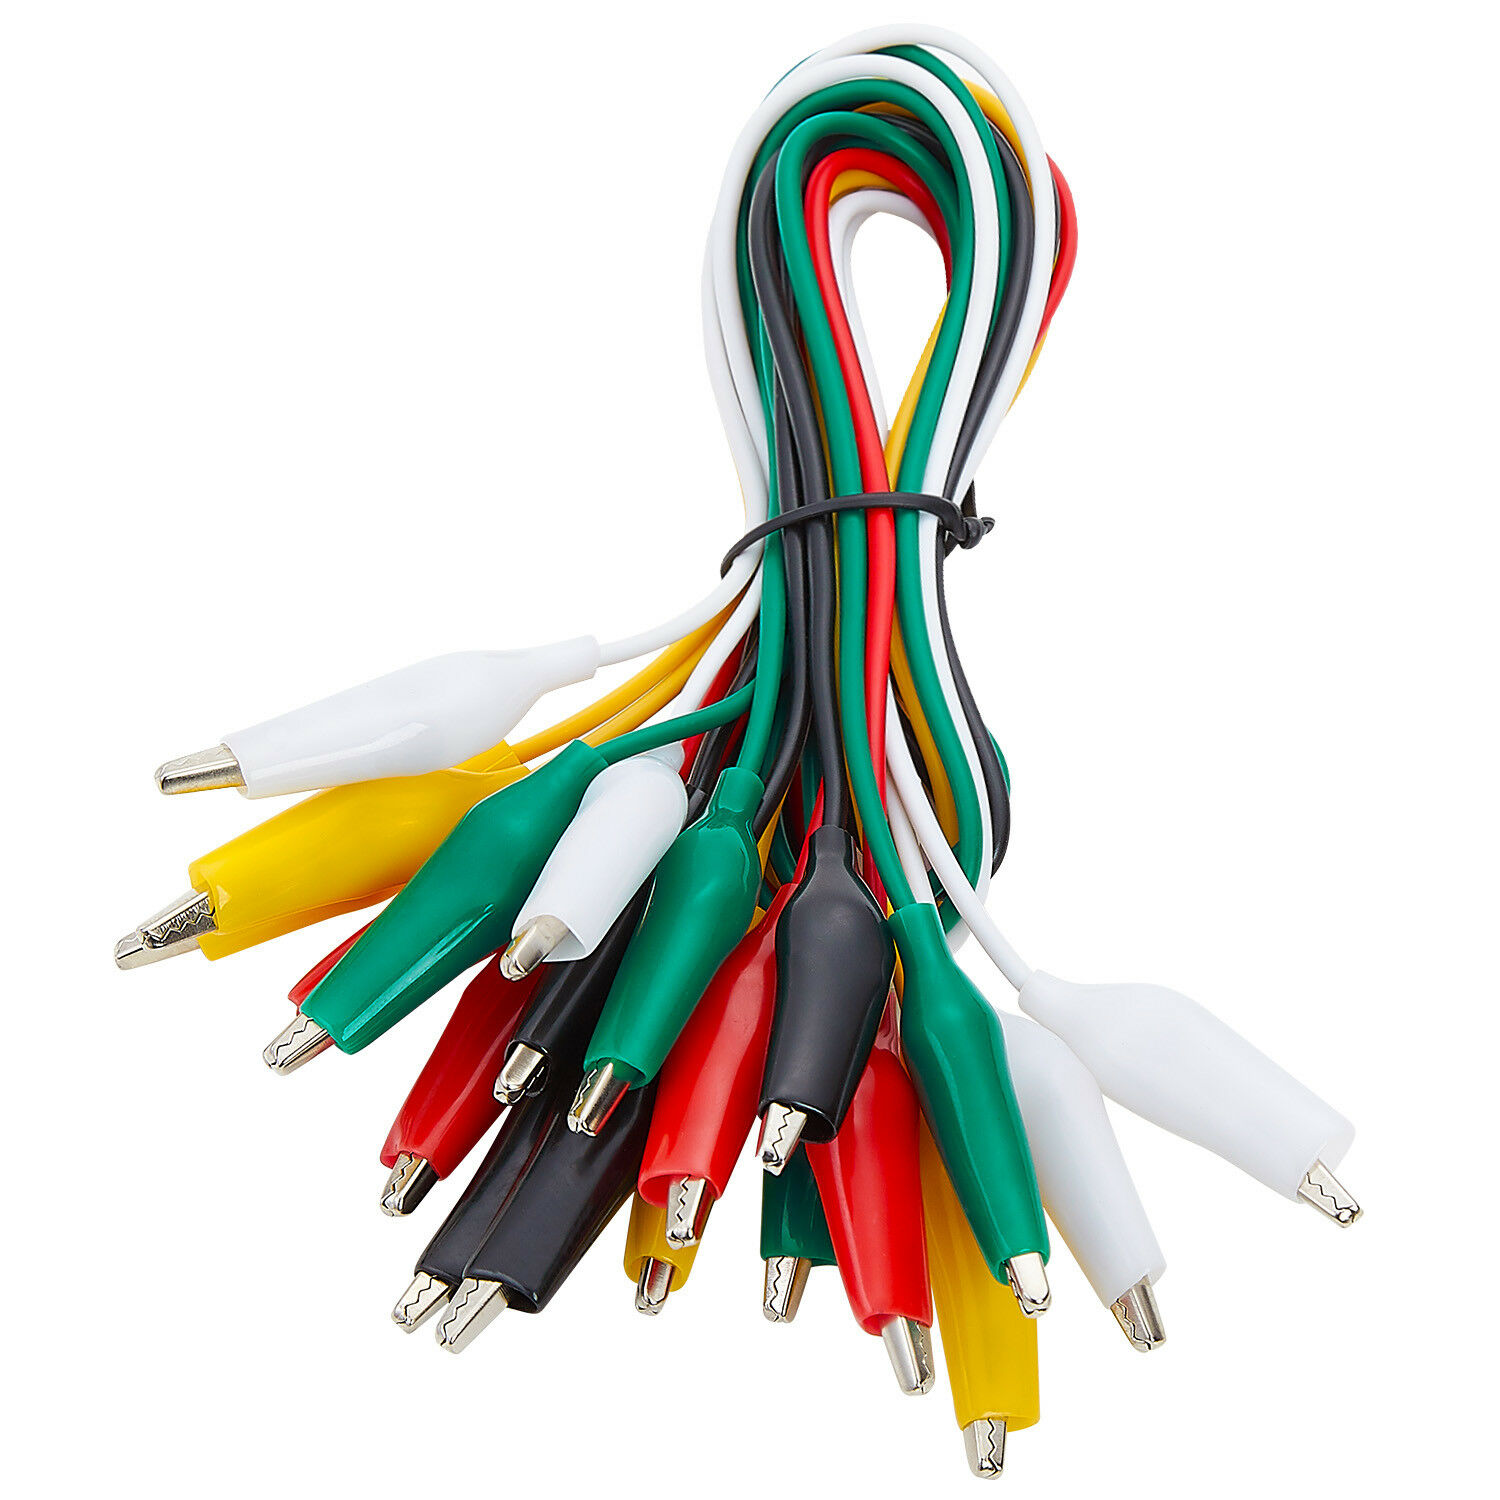 Wgge Wg-026 10 Pieces And 5 Colors Test Lead Set & Alligator Clips, 20.5 Inches